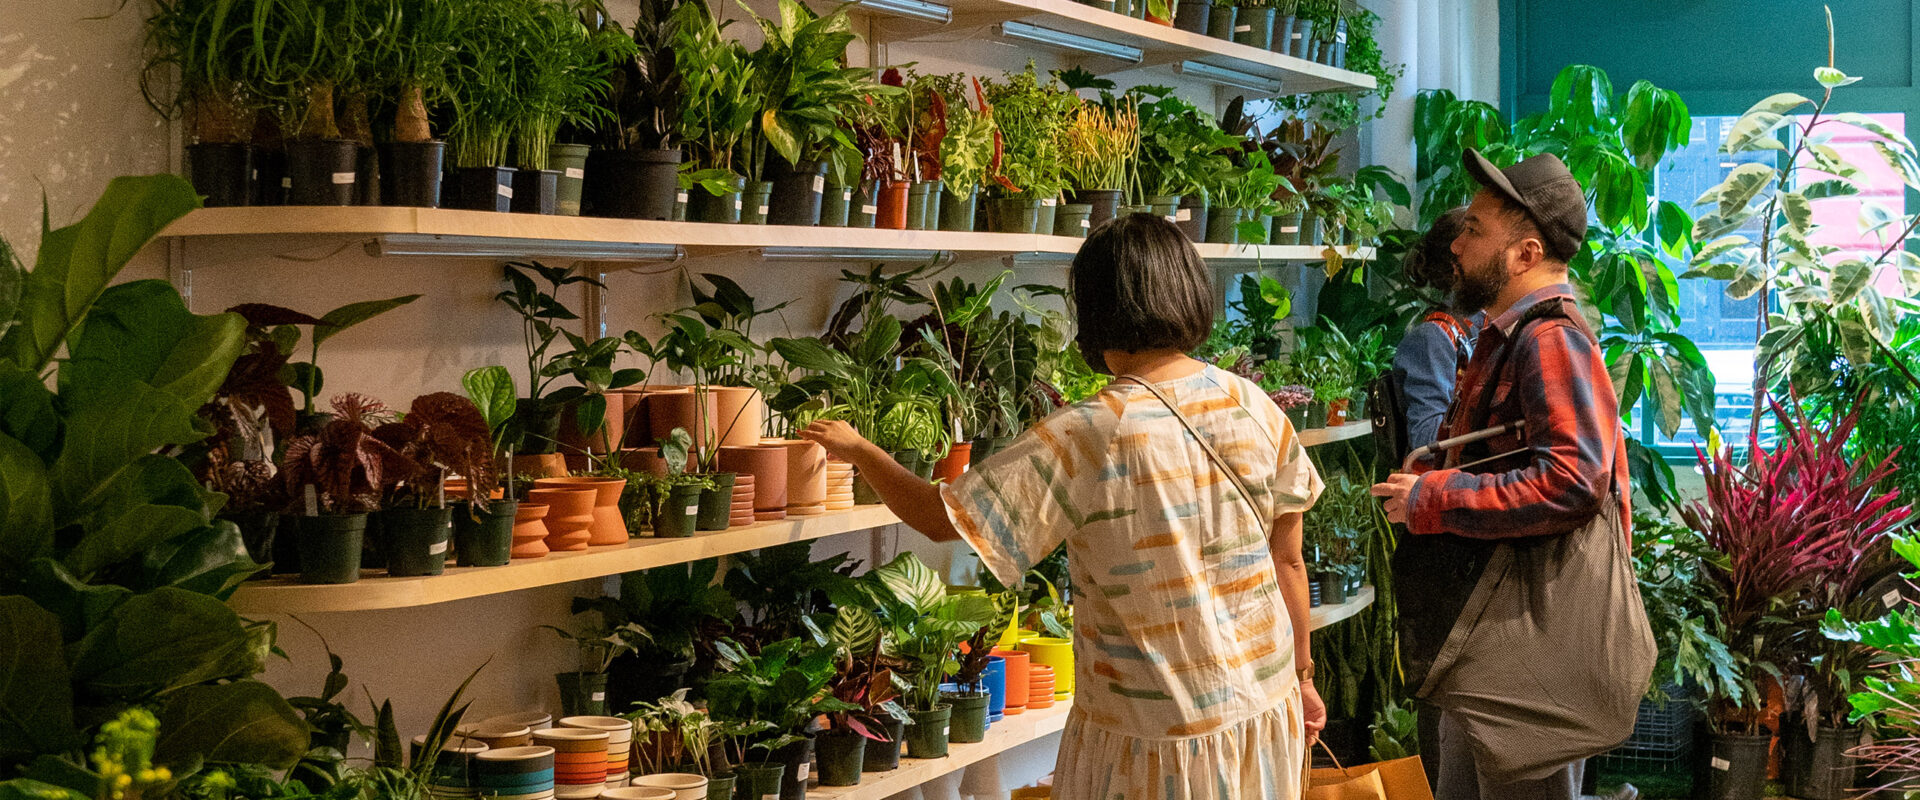 People are shopping in a plant store.